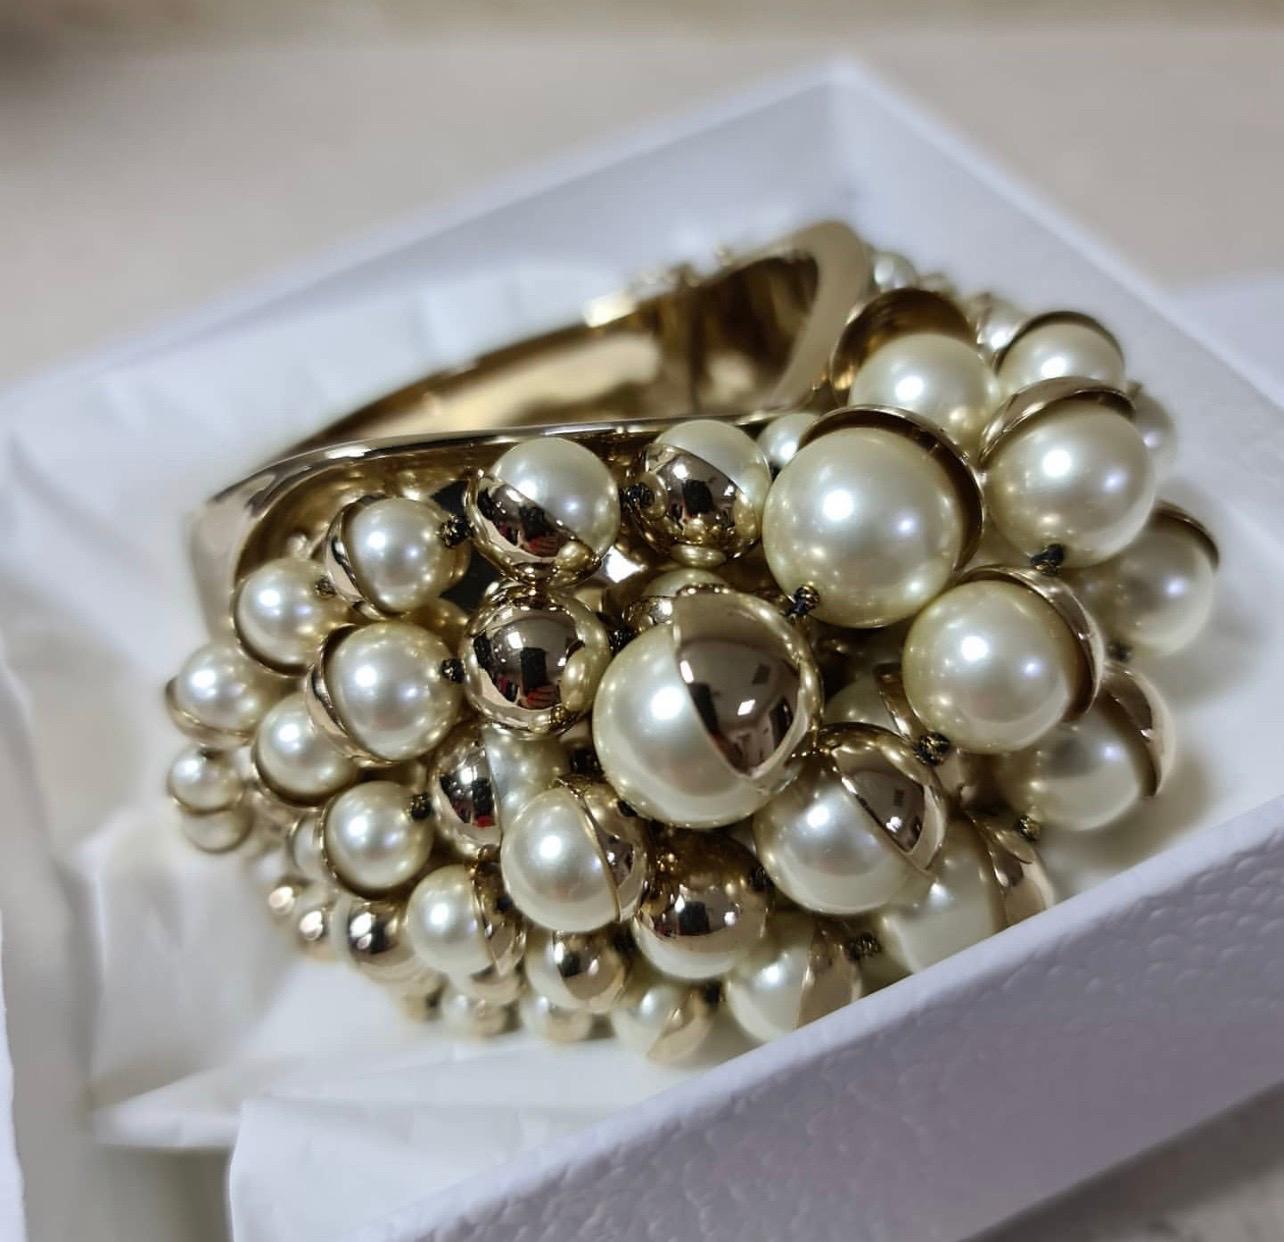 Stunning Dior Pearl Massive Bracelet.
Very good condition.
Hardly ever worn.
Size M
Full set.
For buyers from EU we can provide shipping from Poland. Please demand if you need.